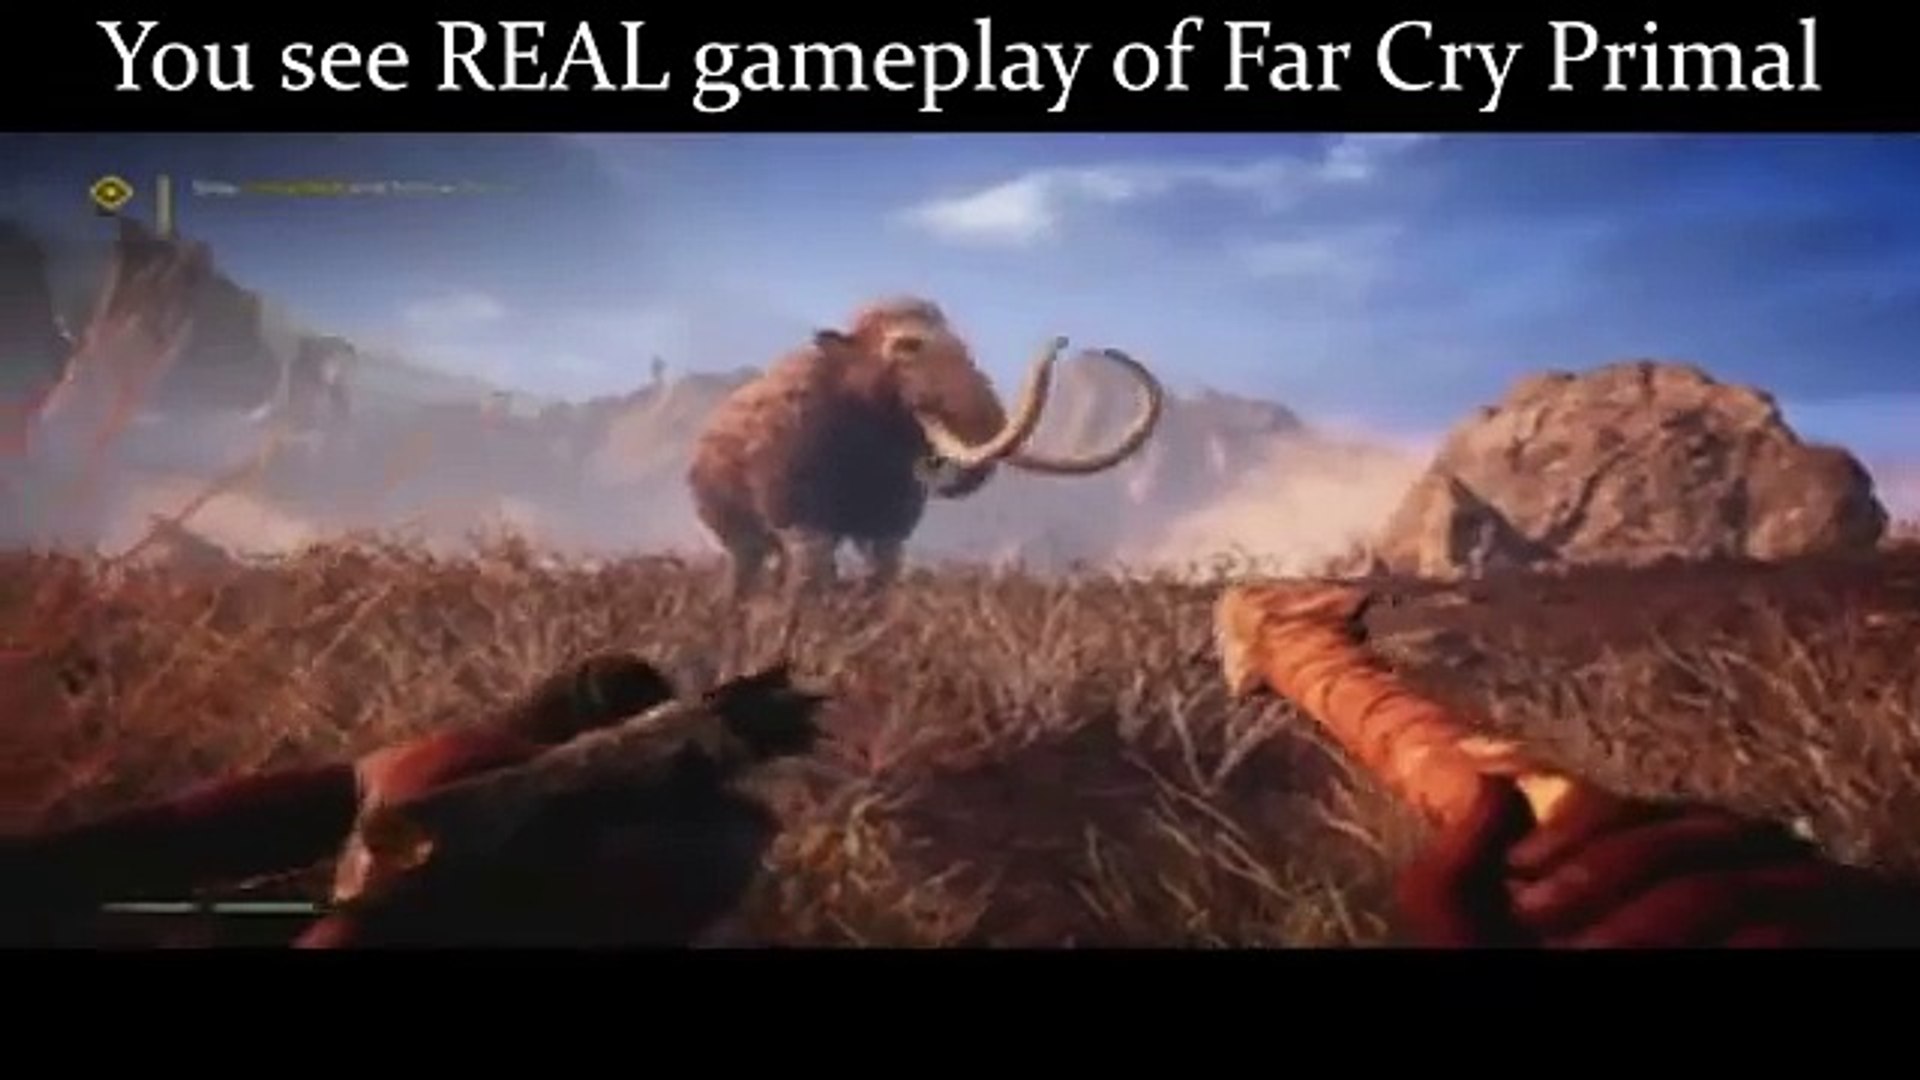 Far Cry Primal free download (PC, XBOX One _ PS4), full game for free, no  torrent! - video Dailymotion